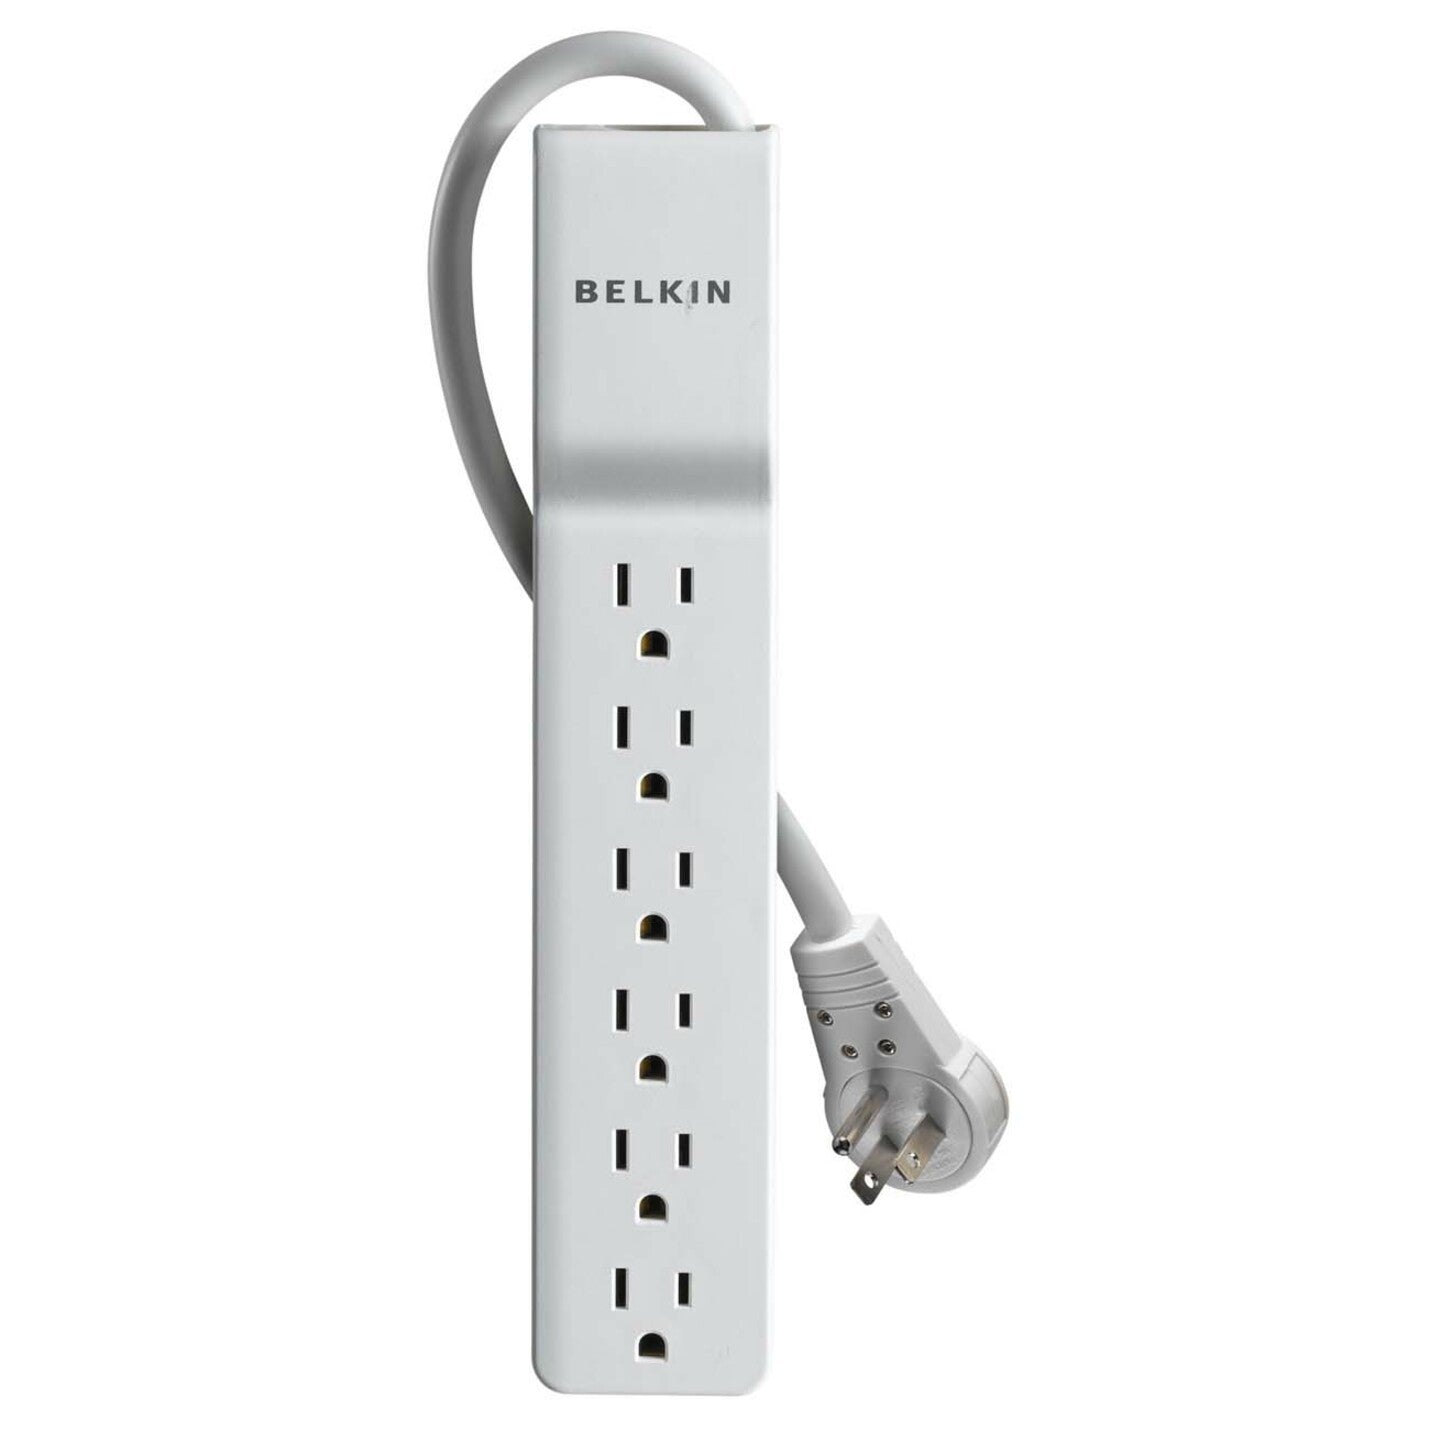 Belkin BE106000-06R Home/Office 6 Outlet Surge Suppressor 720 J 6 ft Power Cord [Discontinued]